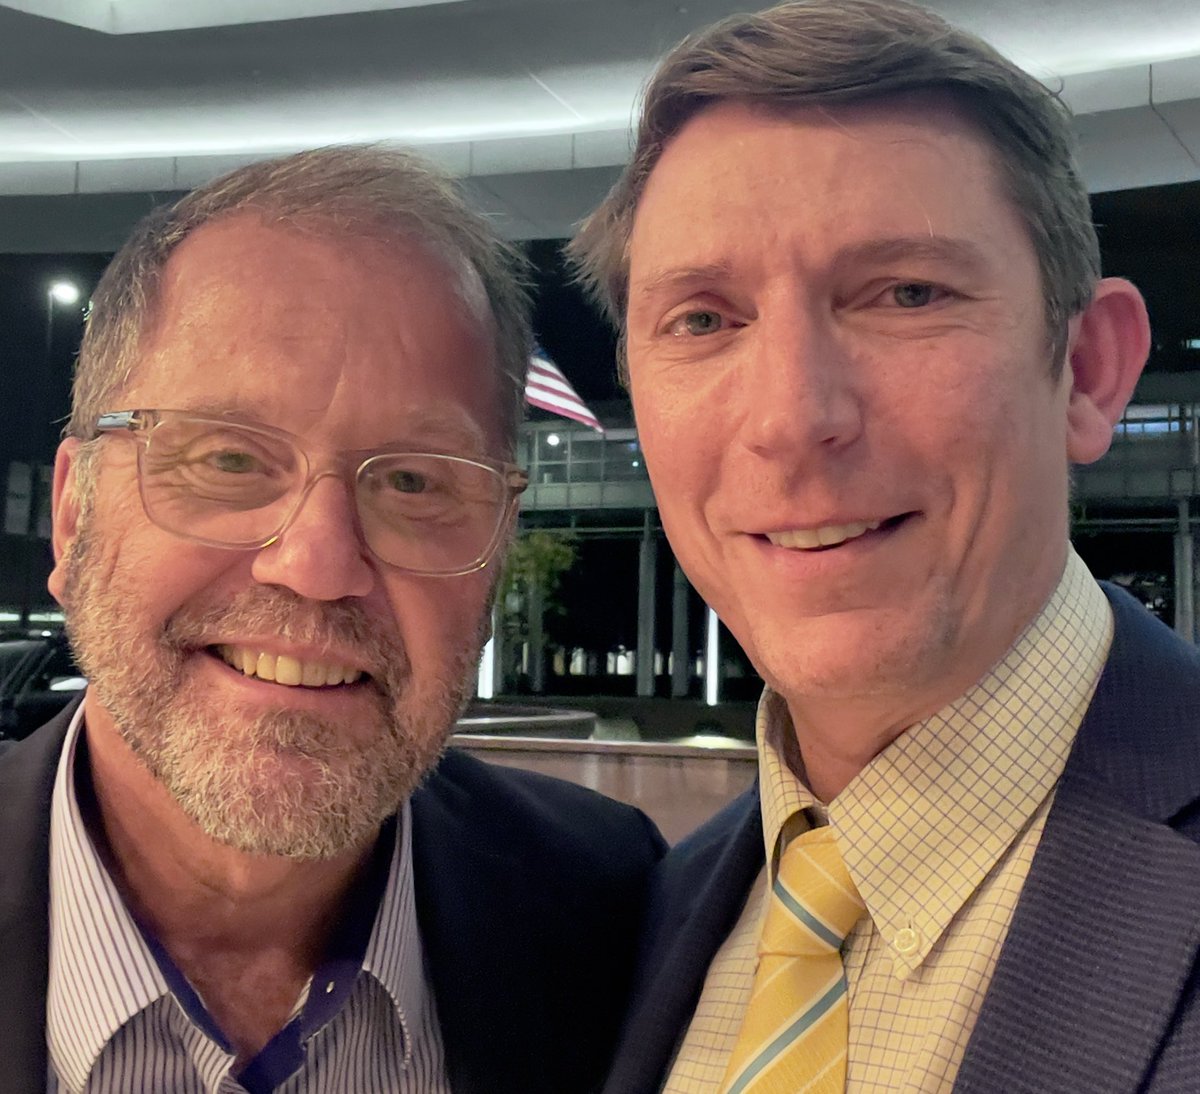 When I was a MS-3 - 25 yrs ago!- I knew Neil Hyman would be #ASCRS President one day - but retire?? Who would have thought!! Congratulations Neil!! You're THE colorectal OG and we at @ClevelandClinic are so proud to host one of its top ever Grads